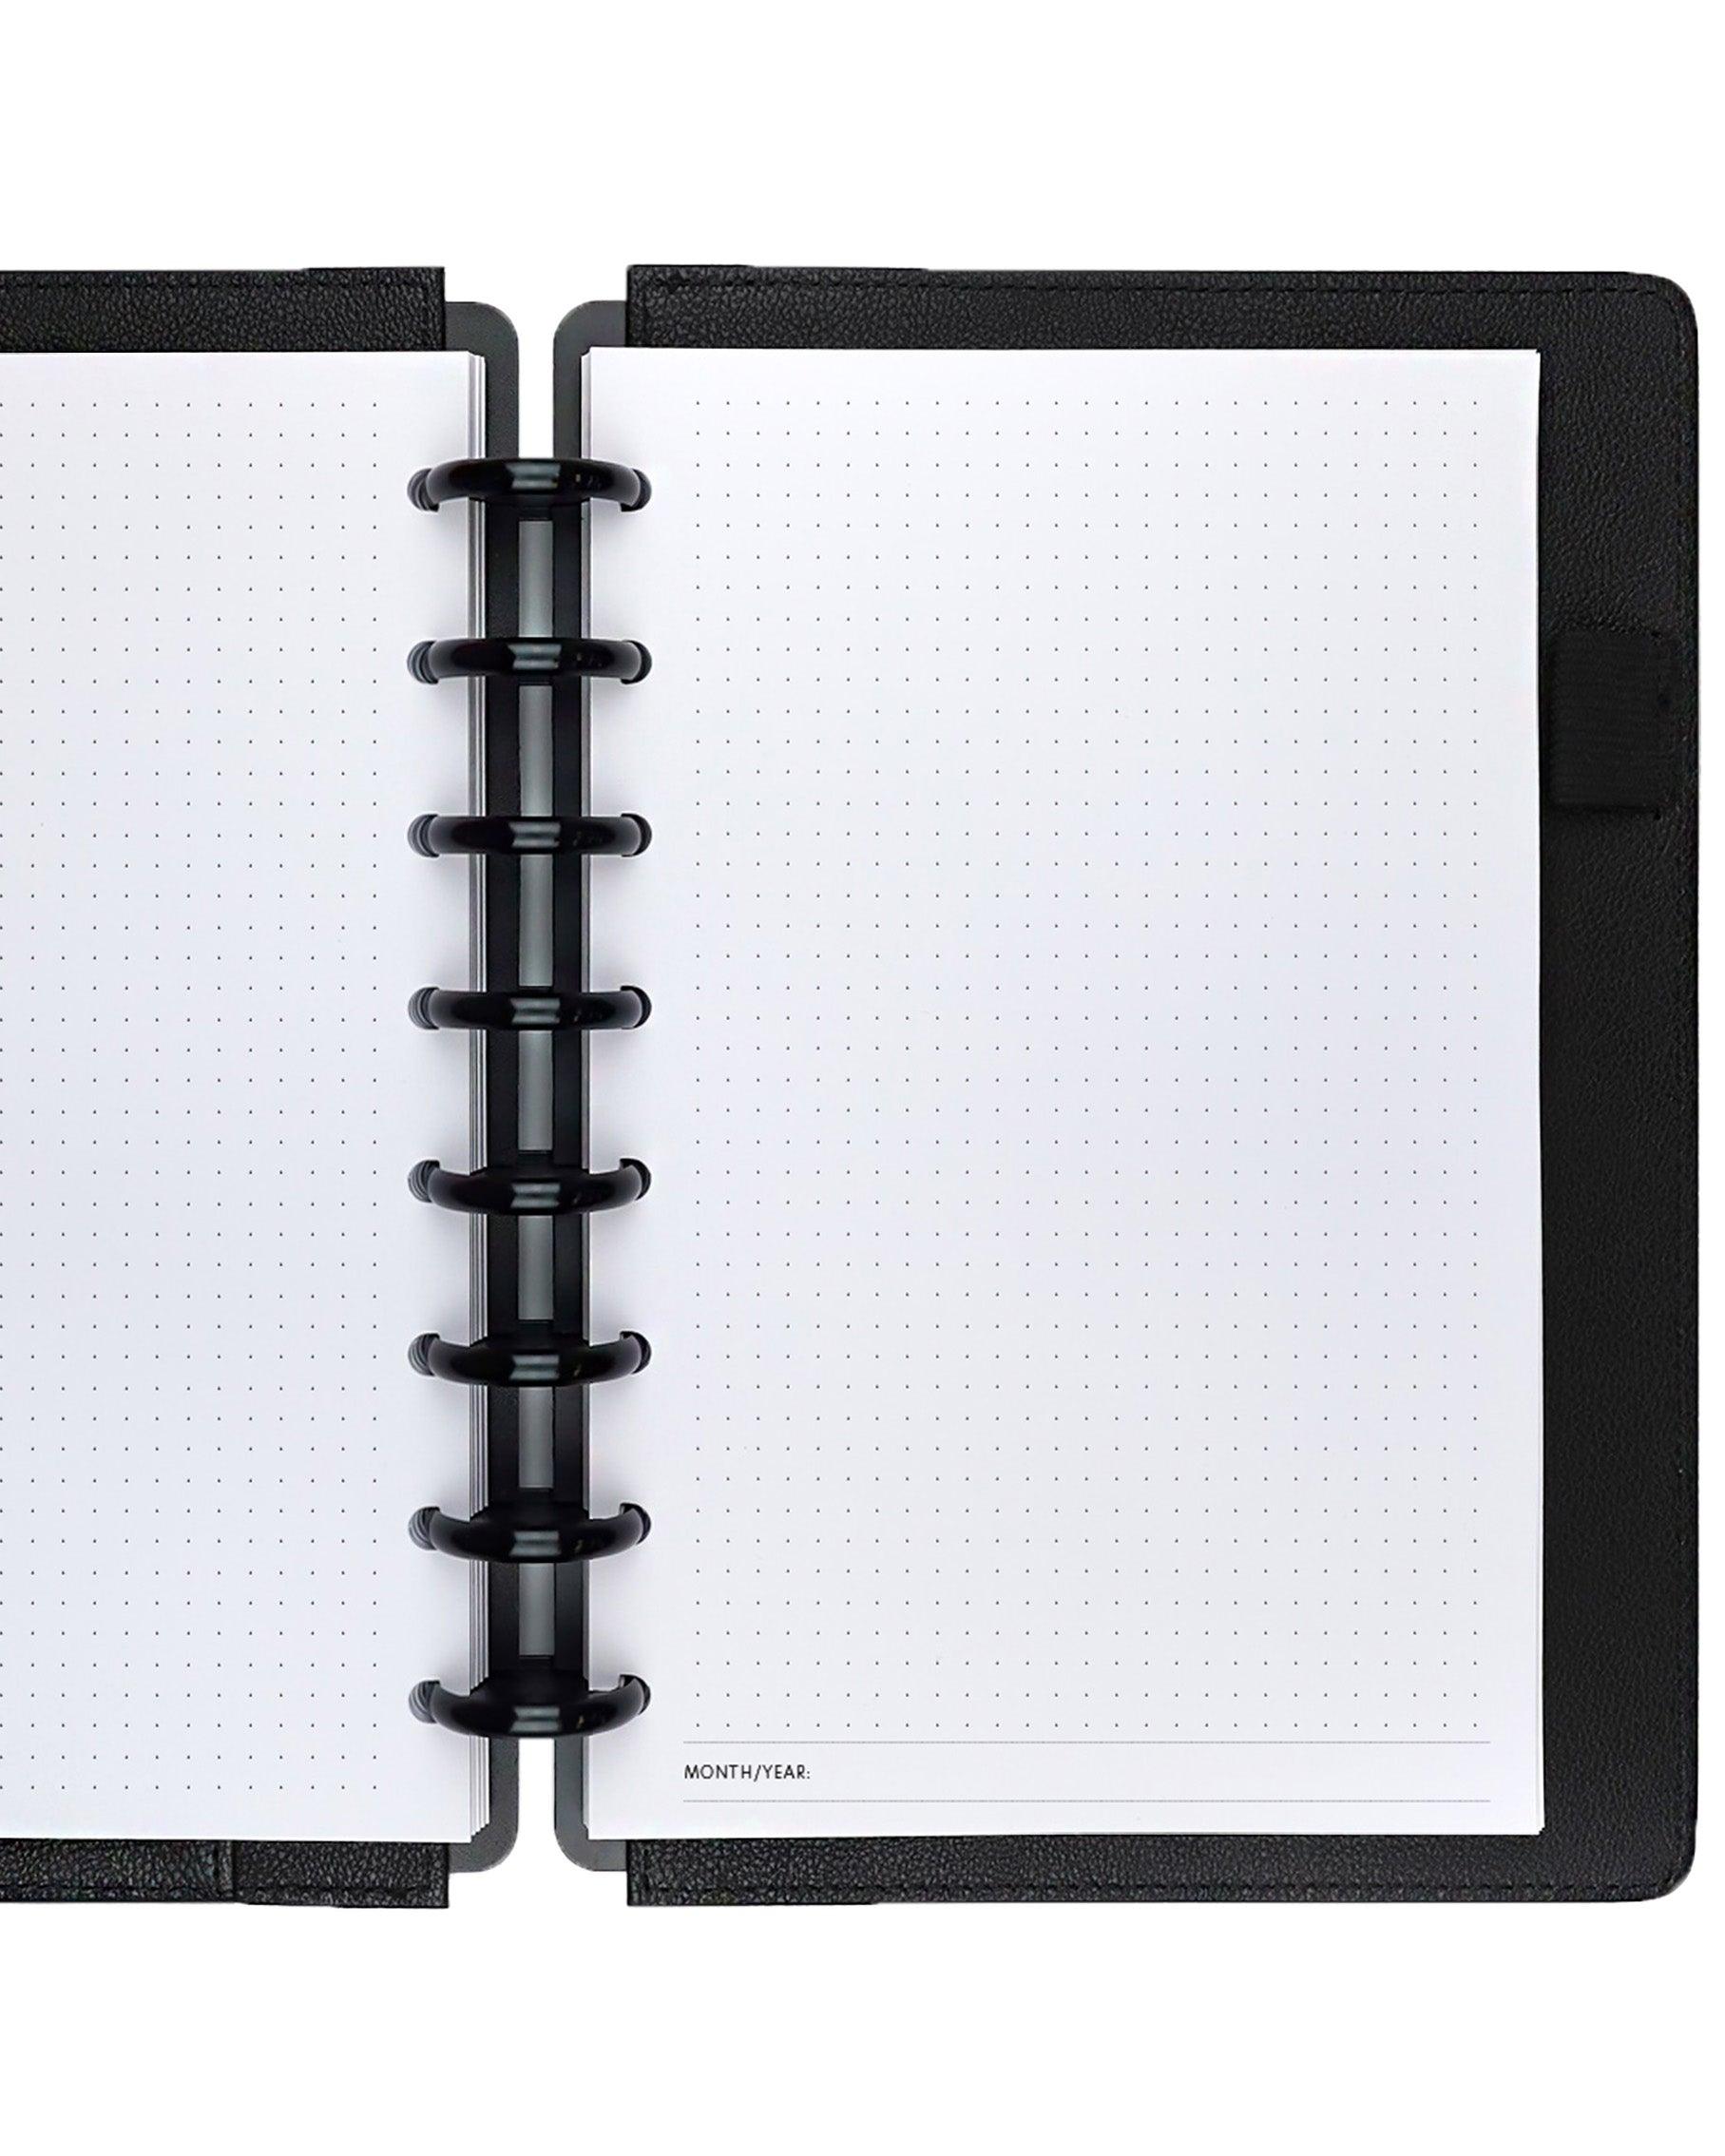 Weekly Planner Inserts for discbound and six ring planner systems By Jane's Agenda.